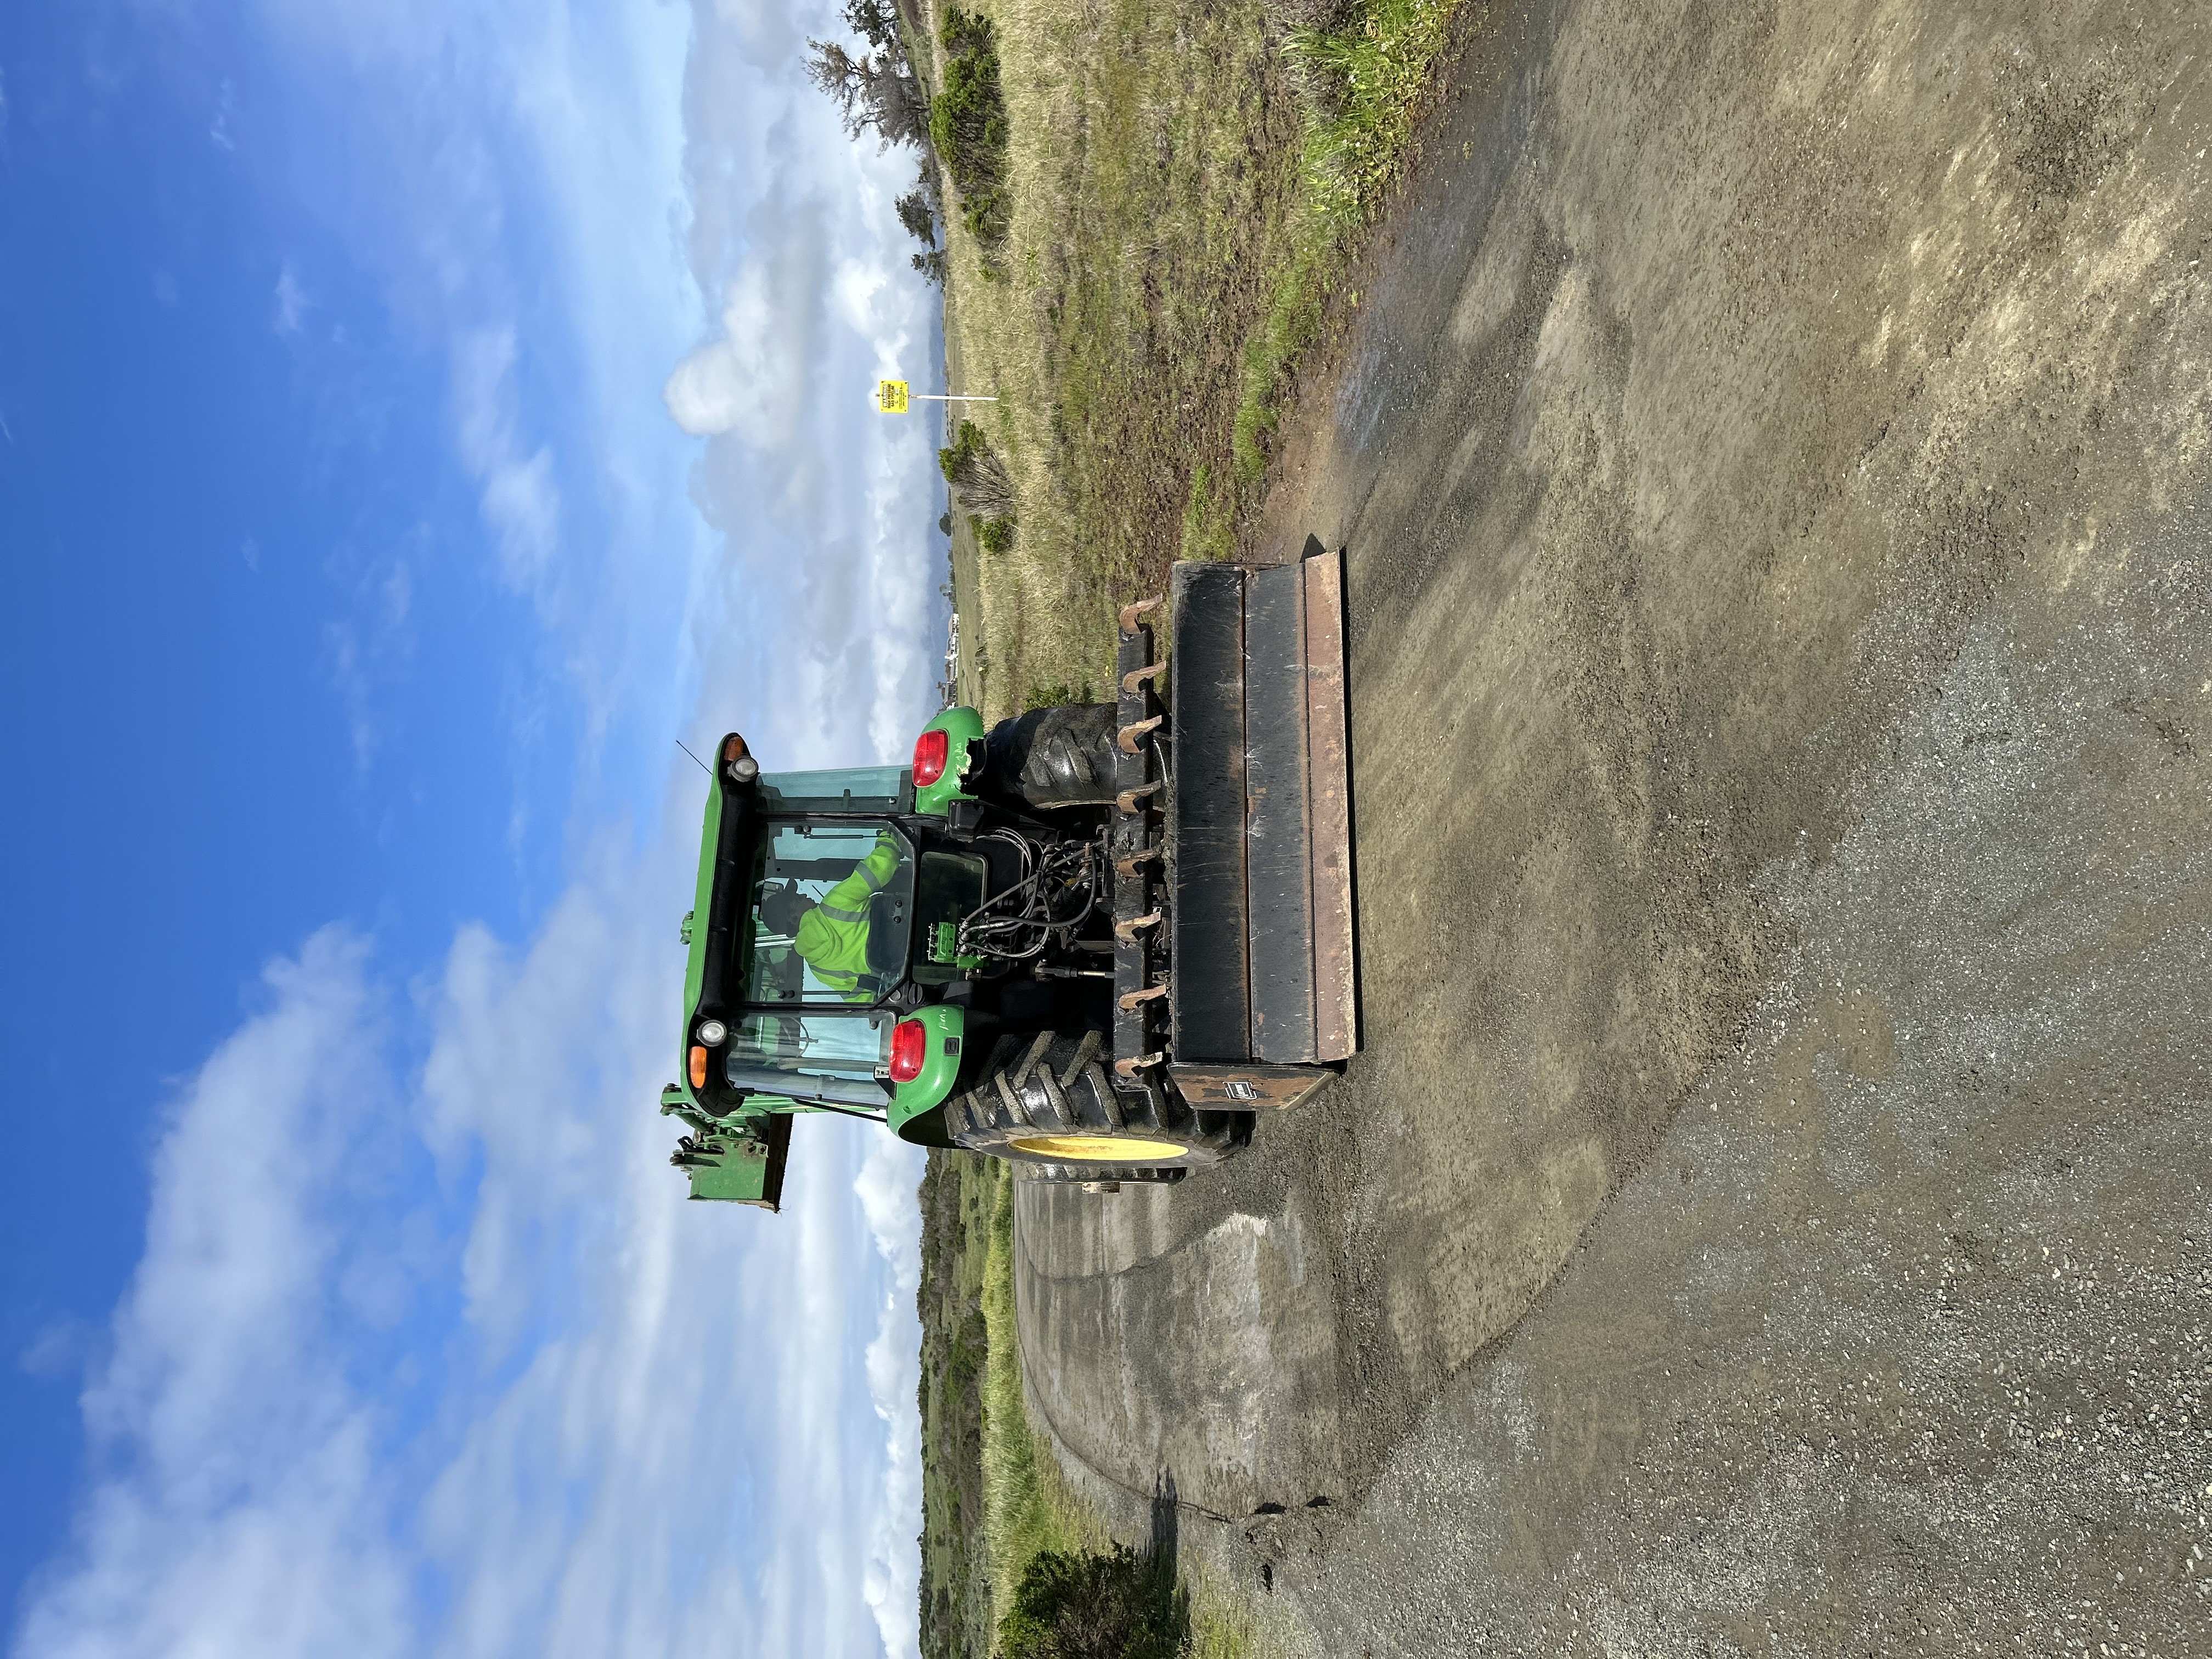 grading the wet access road